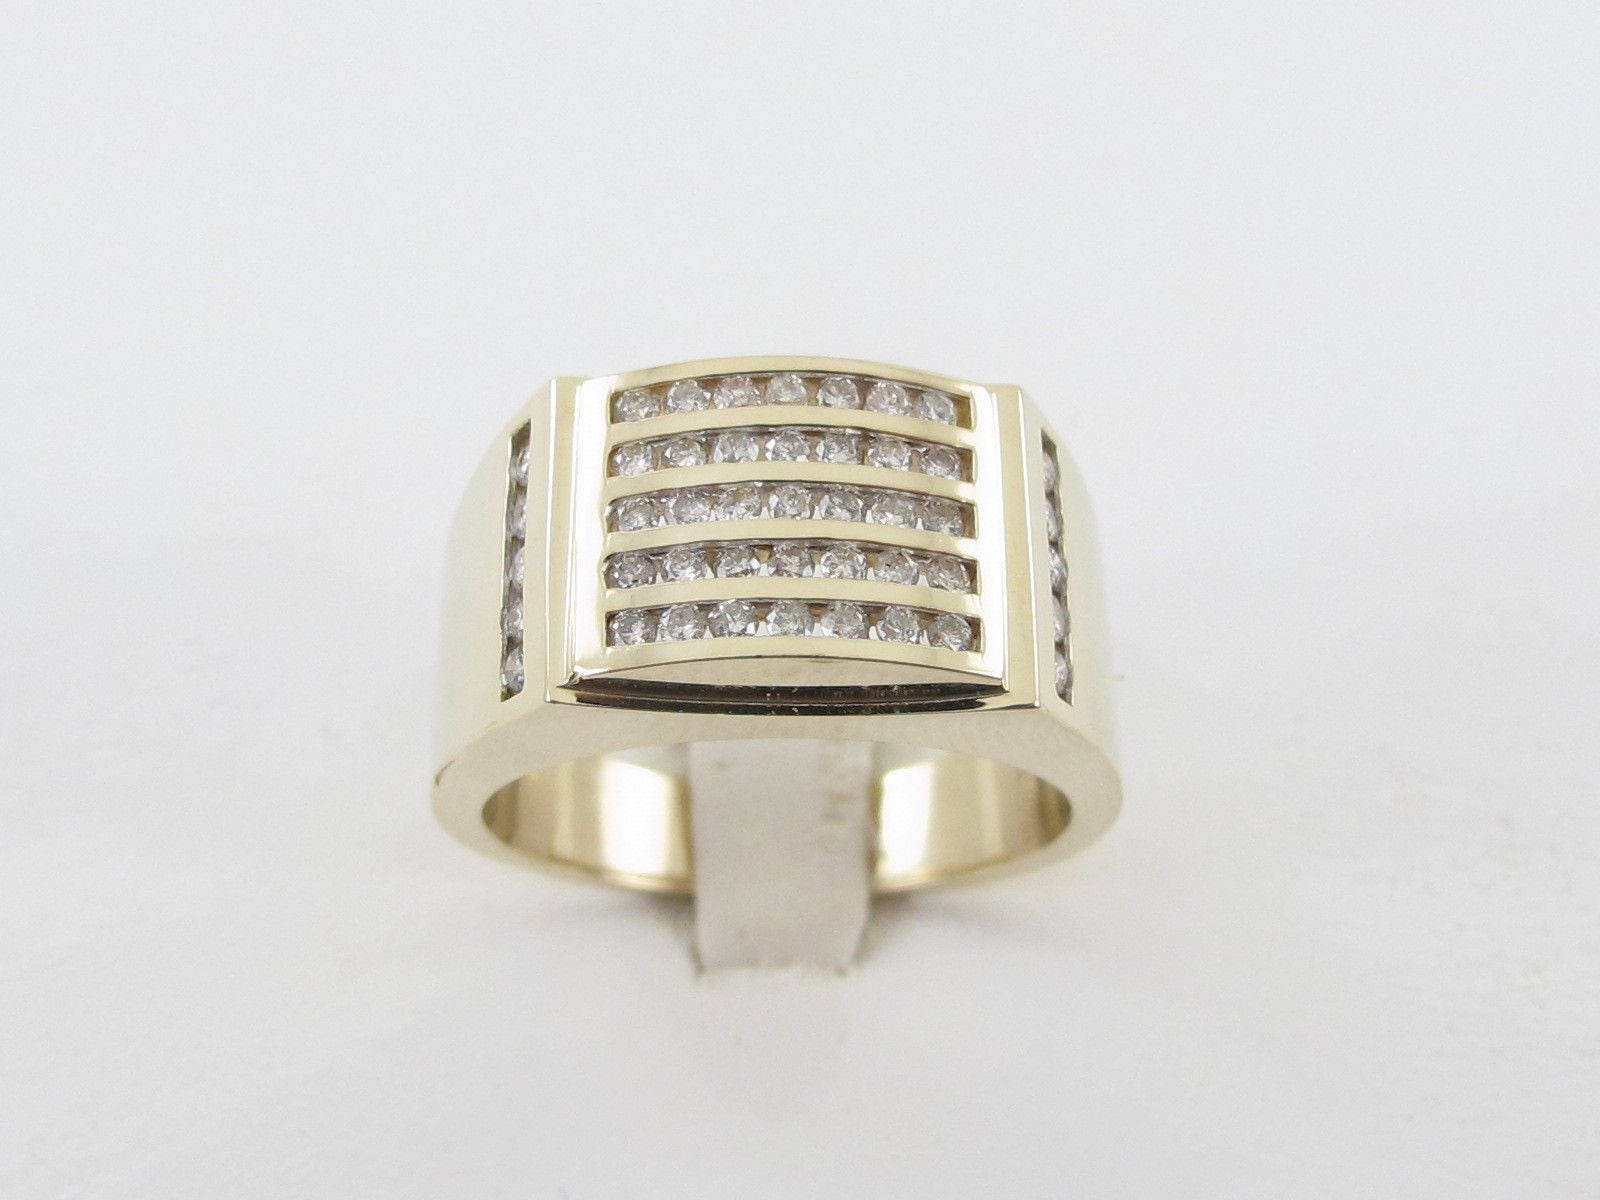 Buy Silver Rings for Men by Giva Online | Ajio.com